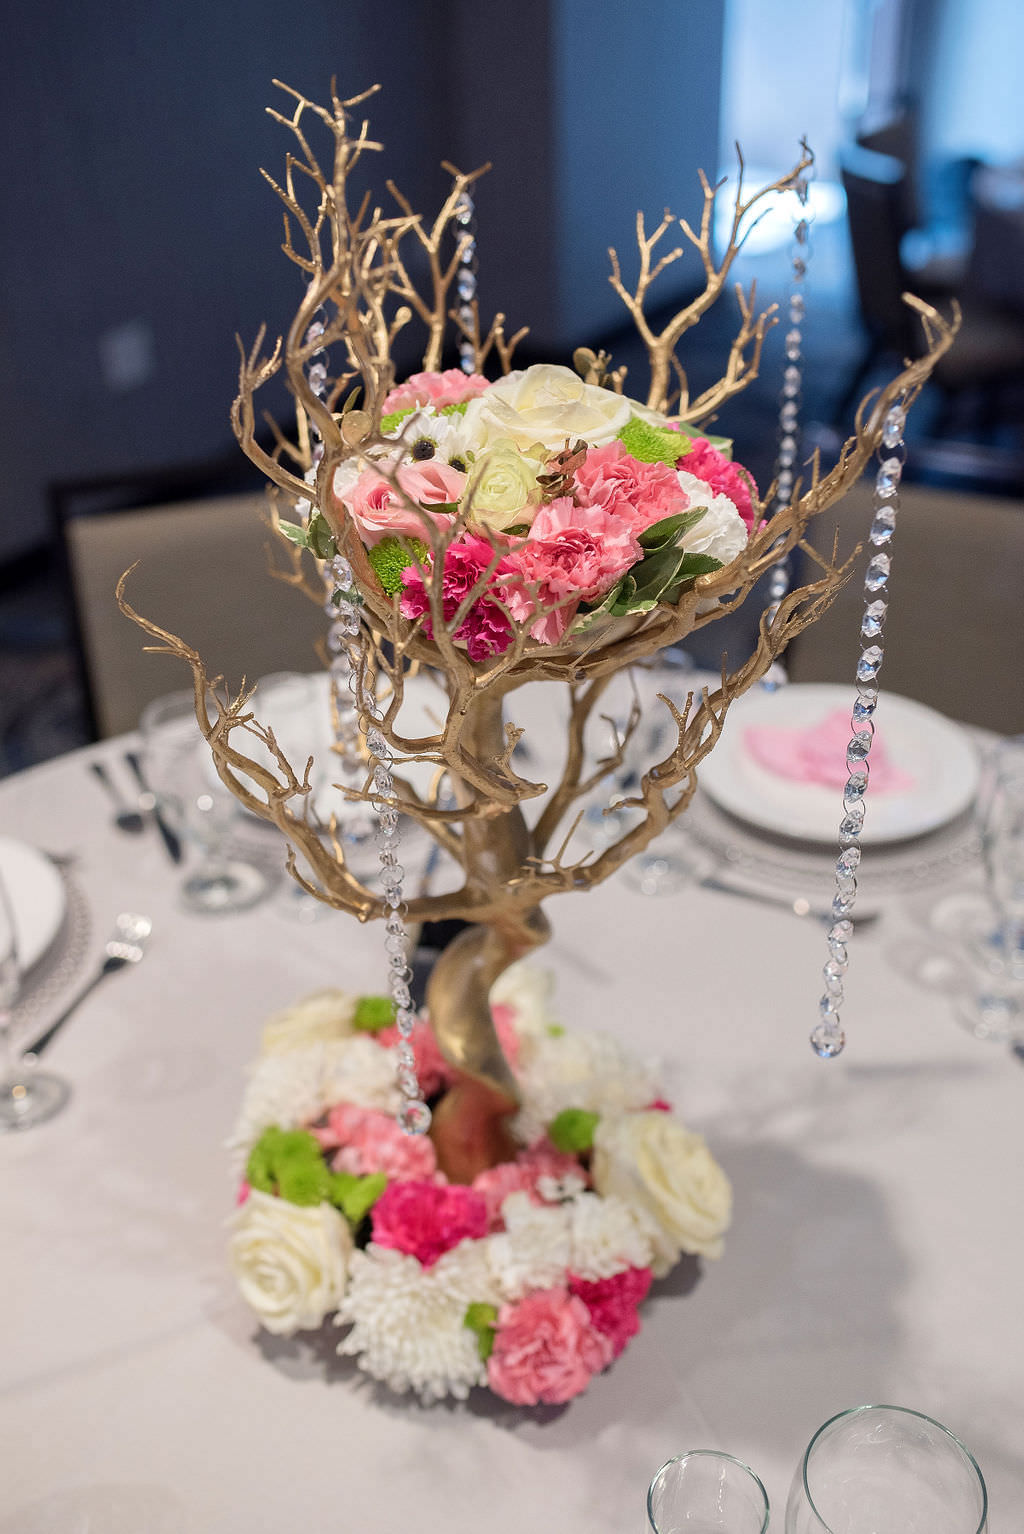 Modern Unique Wedding Reception Decor, Metallic Gold Tree with Pink and White Carnations, Ivory and Pink Roses Floral Arrangements and Hanging Crystals Centerpiece | Tampa Bay Wedding Photographer Kristen Marie Photography | St. Pete Wedding Florist Brides N Blooms | Outside The Box Event Rentals